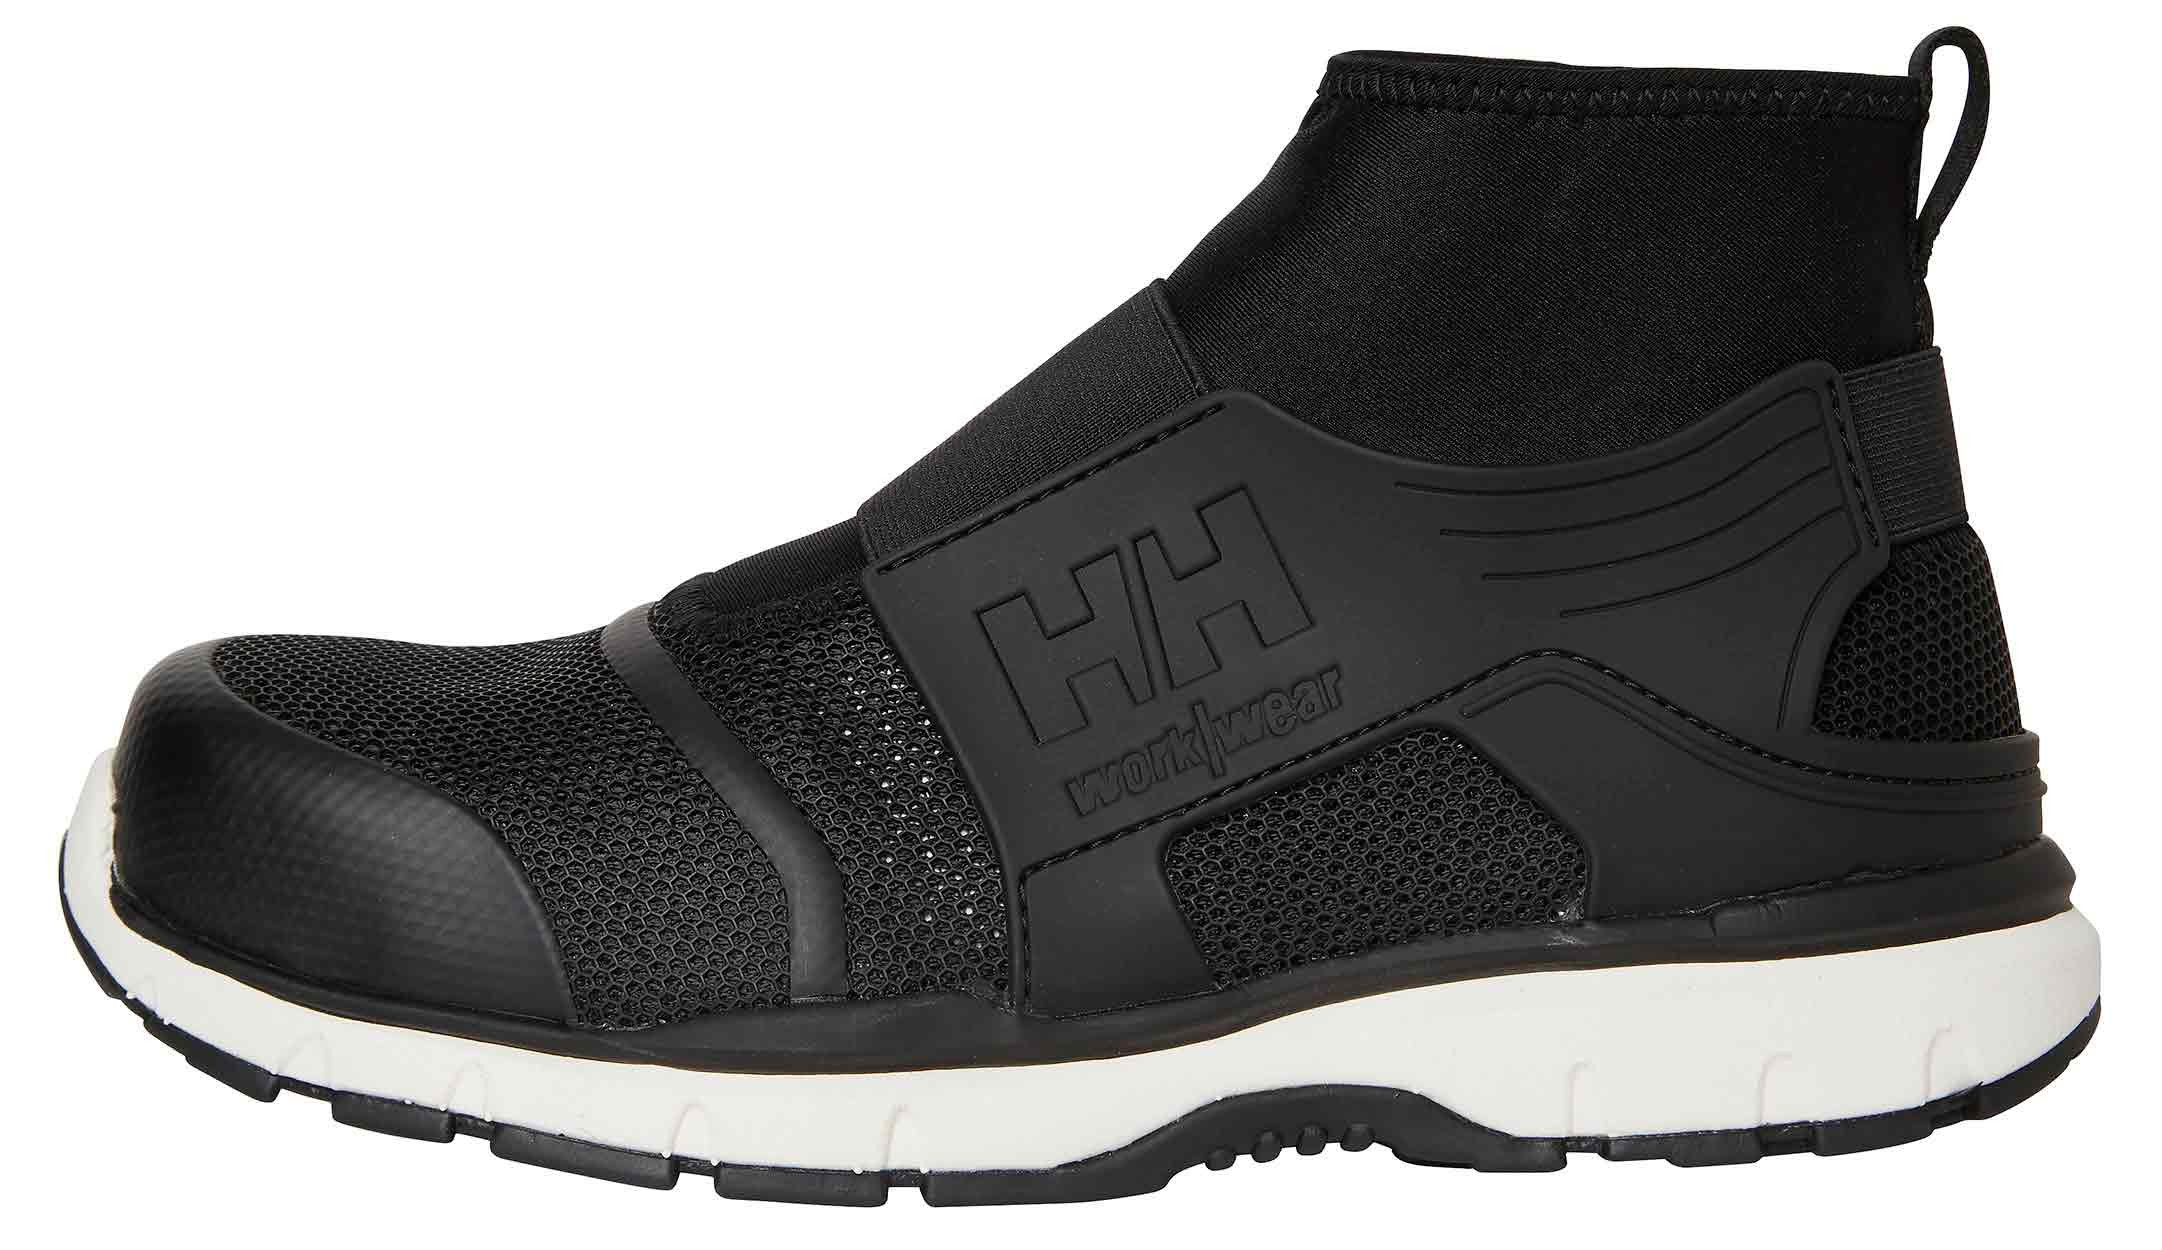 Helly Hansen 78237 Sandal Boot - Standard Safety Boots - Mens Safety Boots  & Shoes - Safety Footwear - Best Workwear